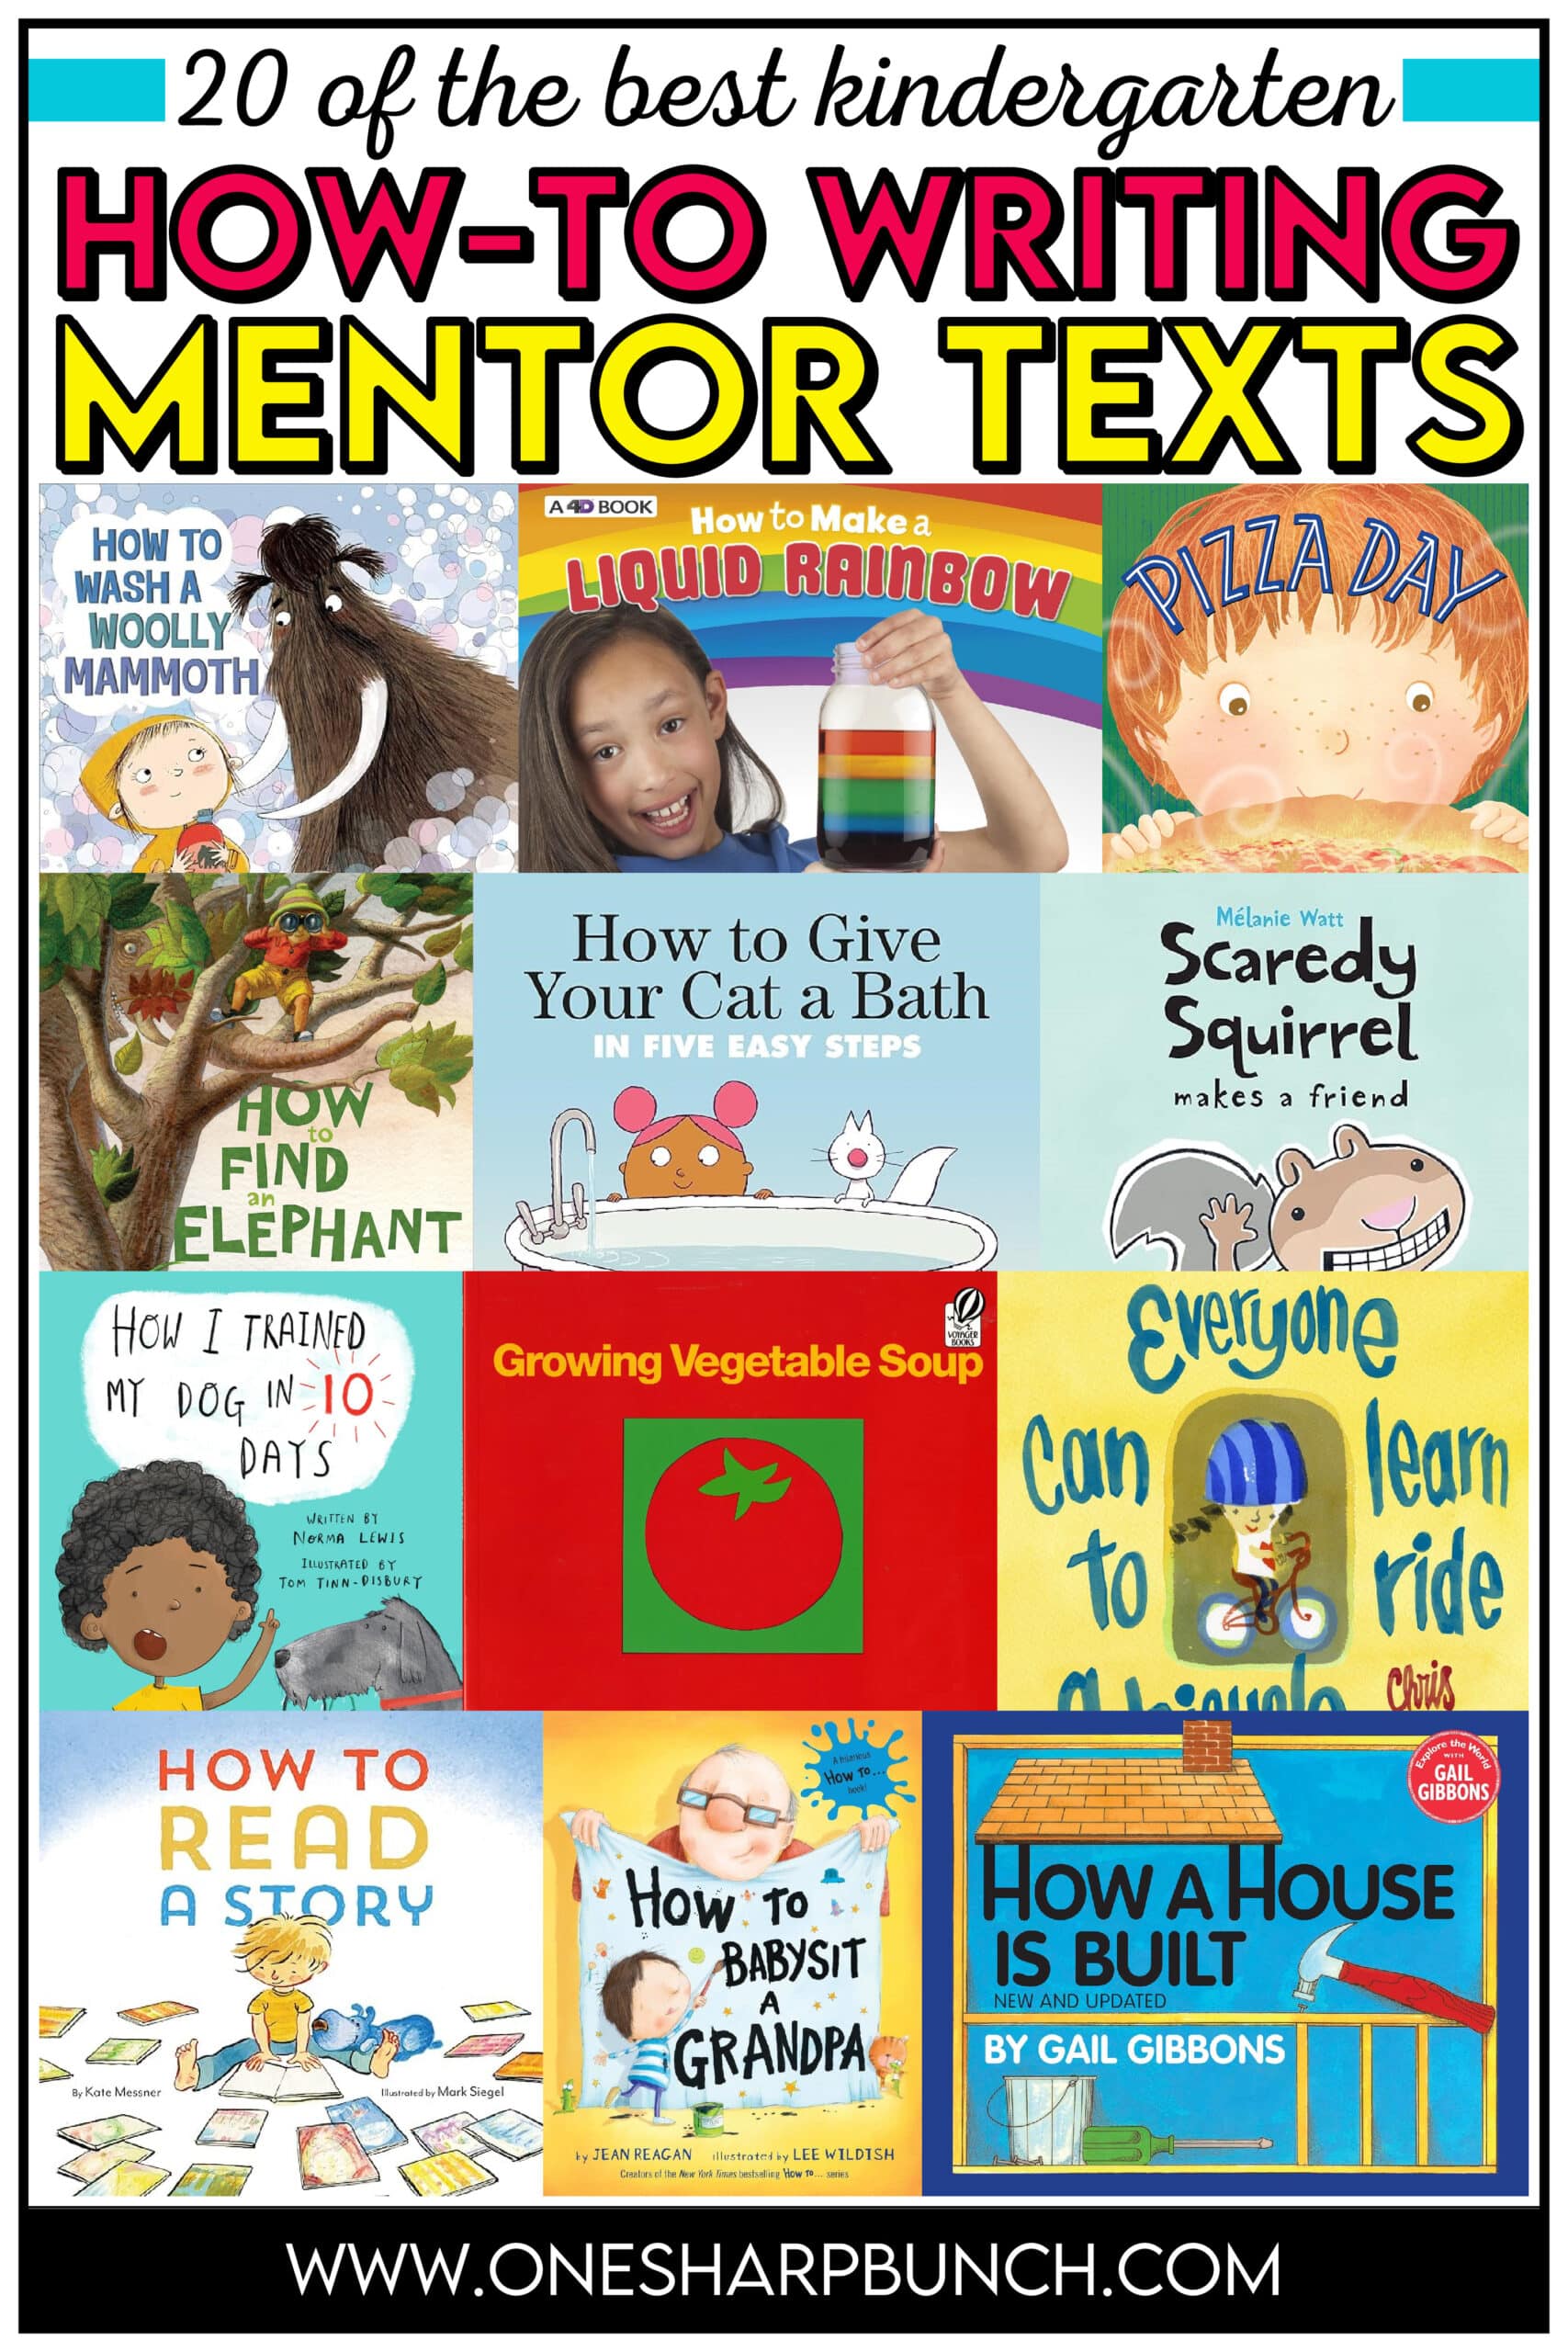 Boost engagement and help students better understand procedural writing with these 15 how-to writing mentor texts for kindergarten and first grade! These procedural writing mentor texts help students understand sequential writing as well as transition words for their how-to writing pieces. Use these how-to mentor texts for your writing mini lessons and allow students to use them as a model as they work on their own informational writing. You will also find how-to writing activities & crafts!